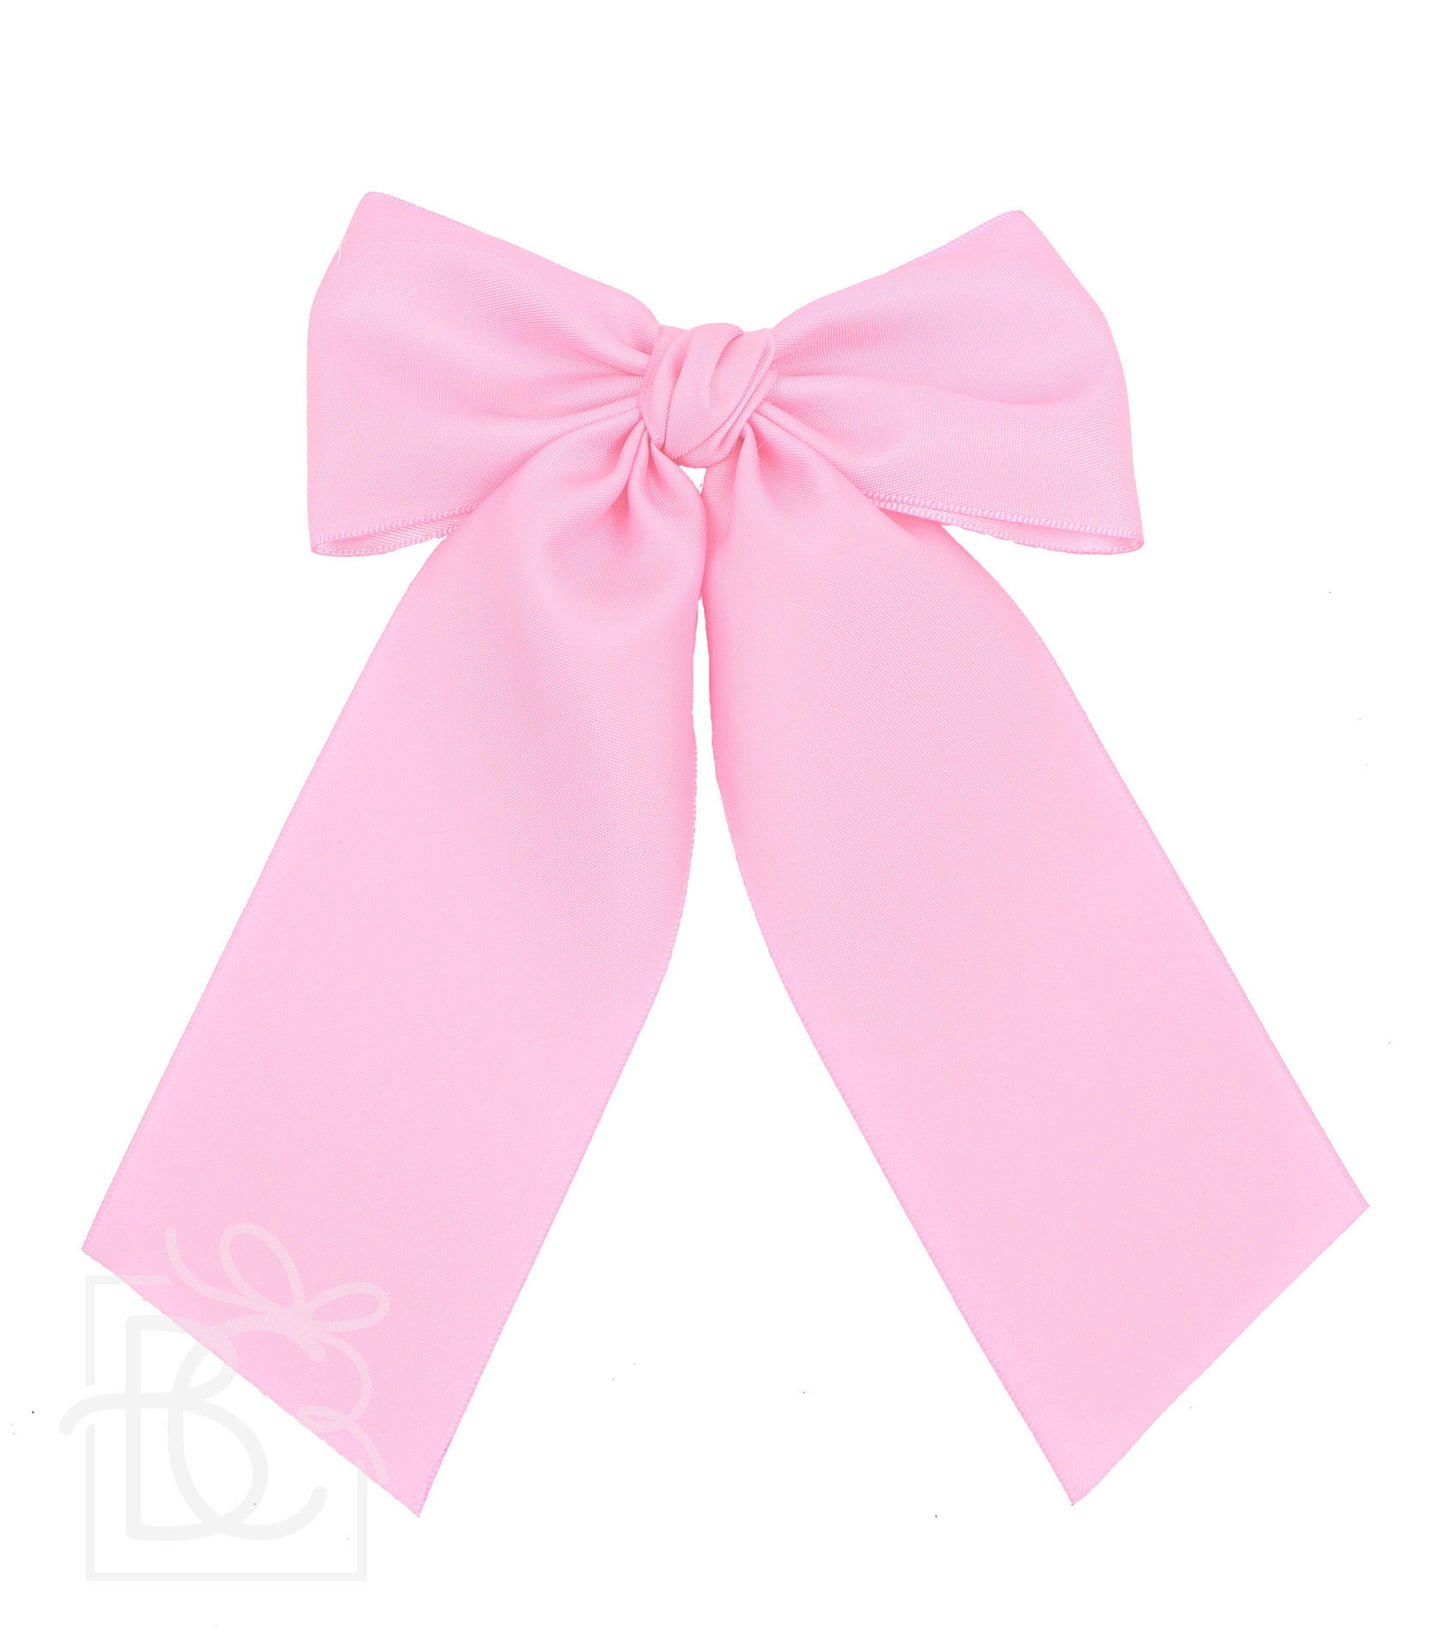 Beyond Creations - Opaque Satin Bow 4.5" Knot & Tails